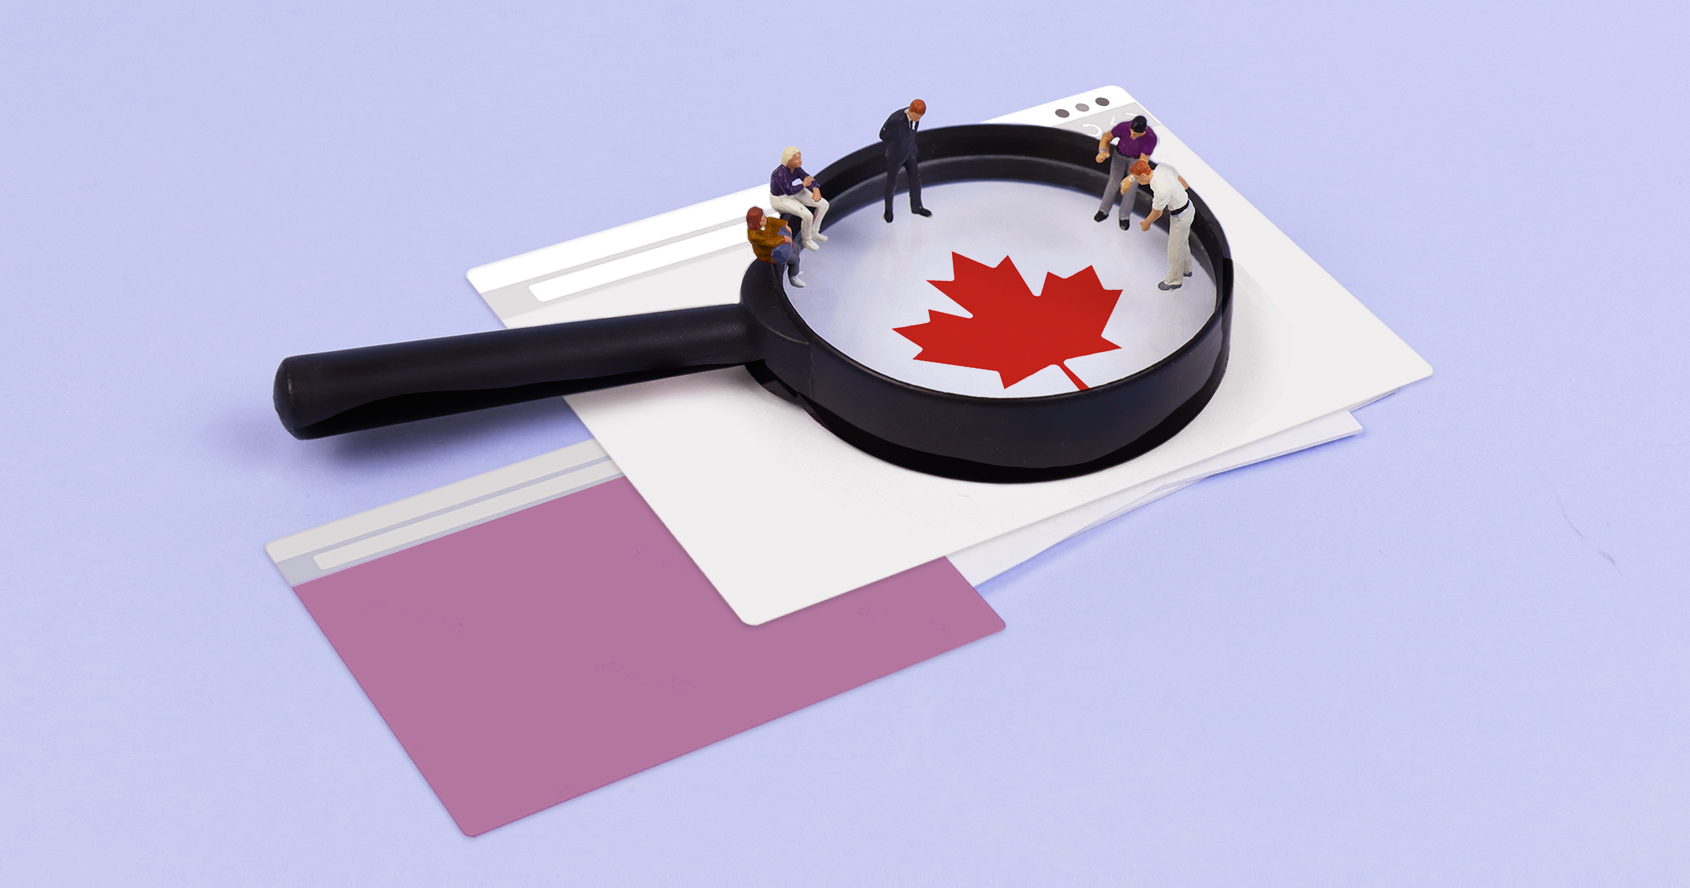 Top 6 software companies in Canada as reviewed by Canadians